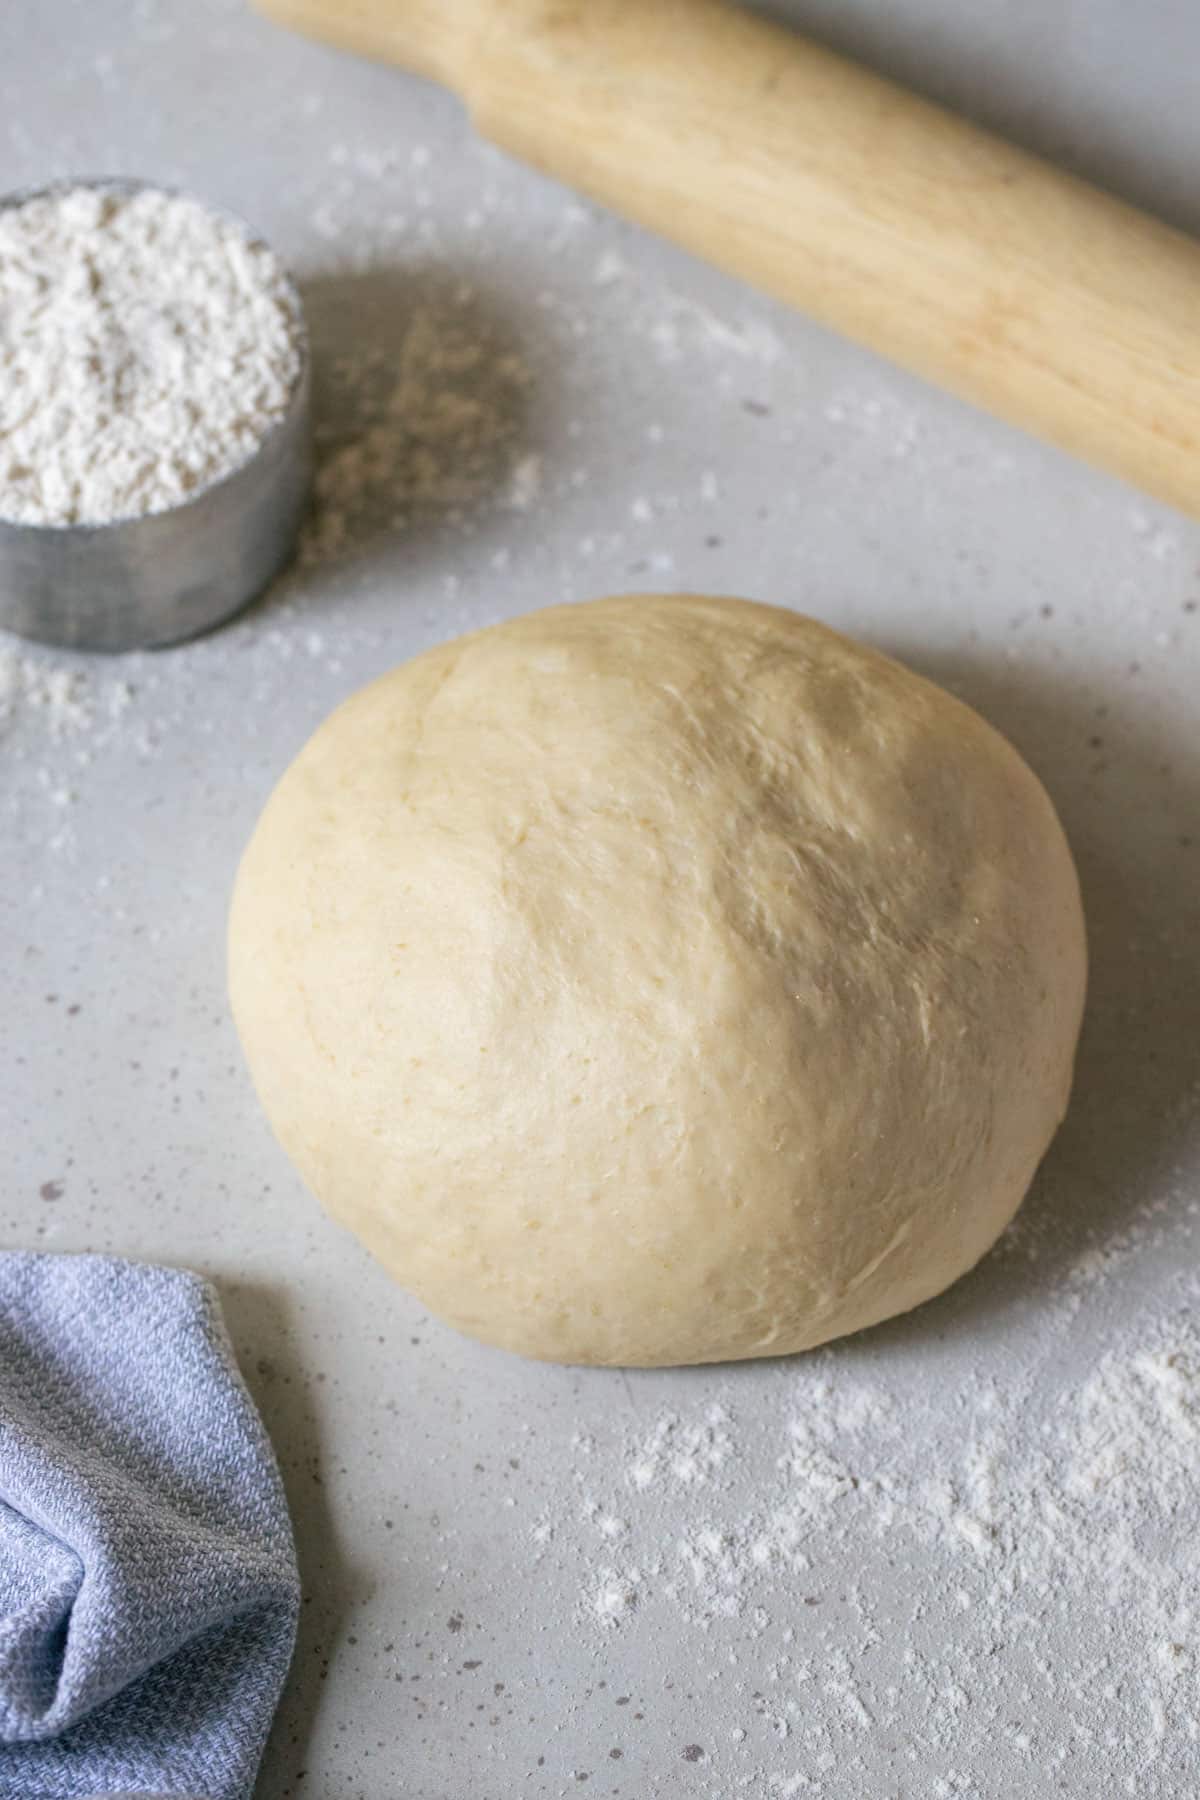 a ball of pizza dough on a table with flour and a rolling pin.